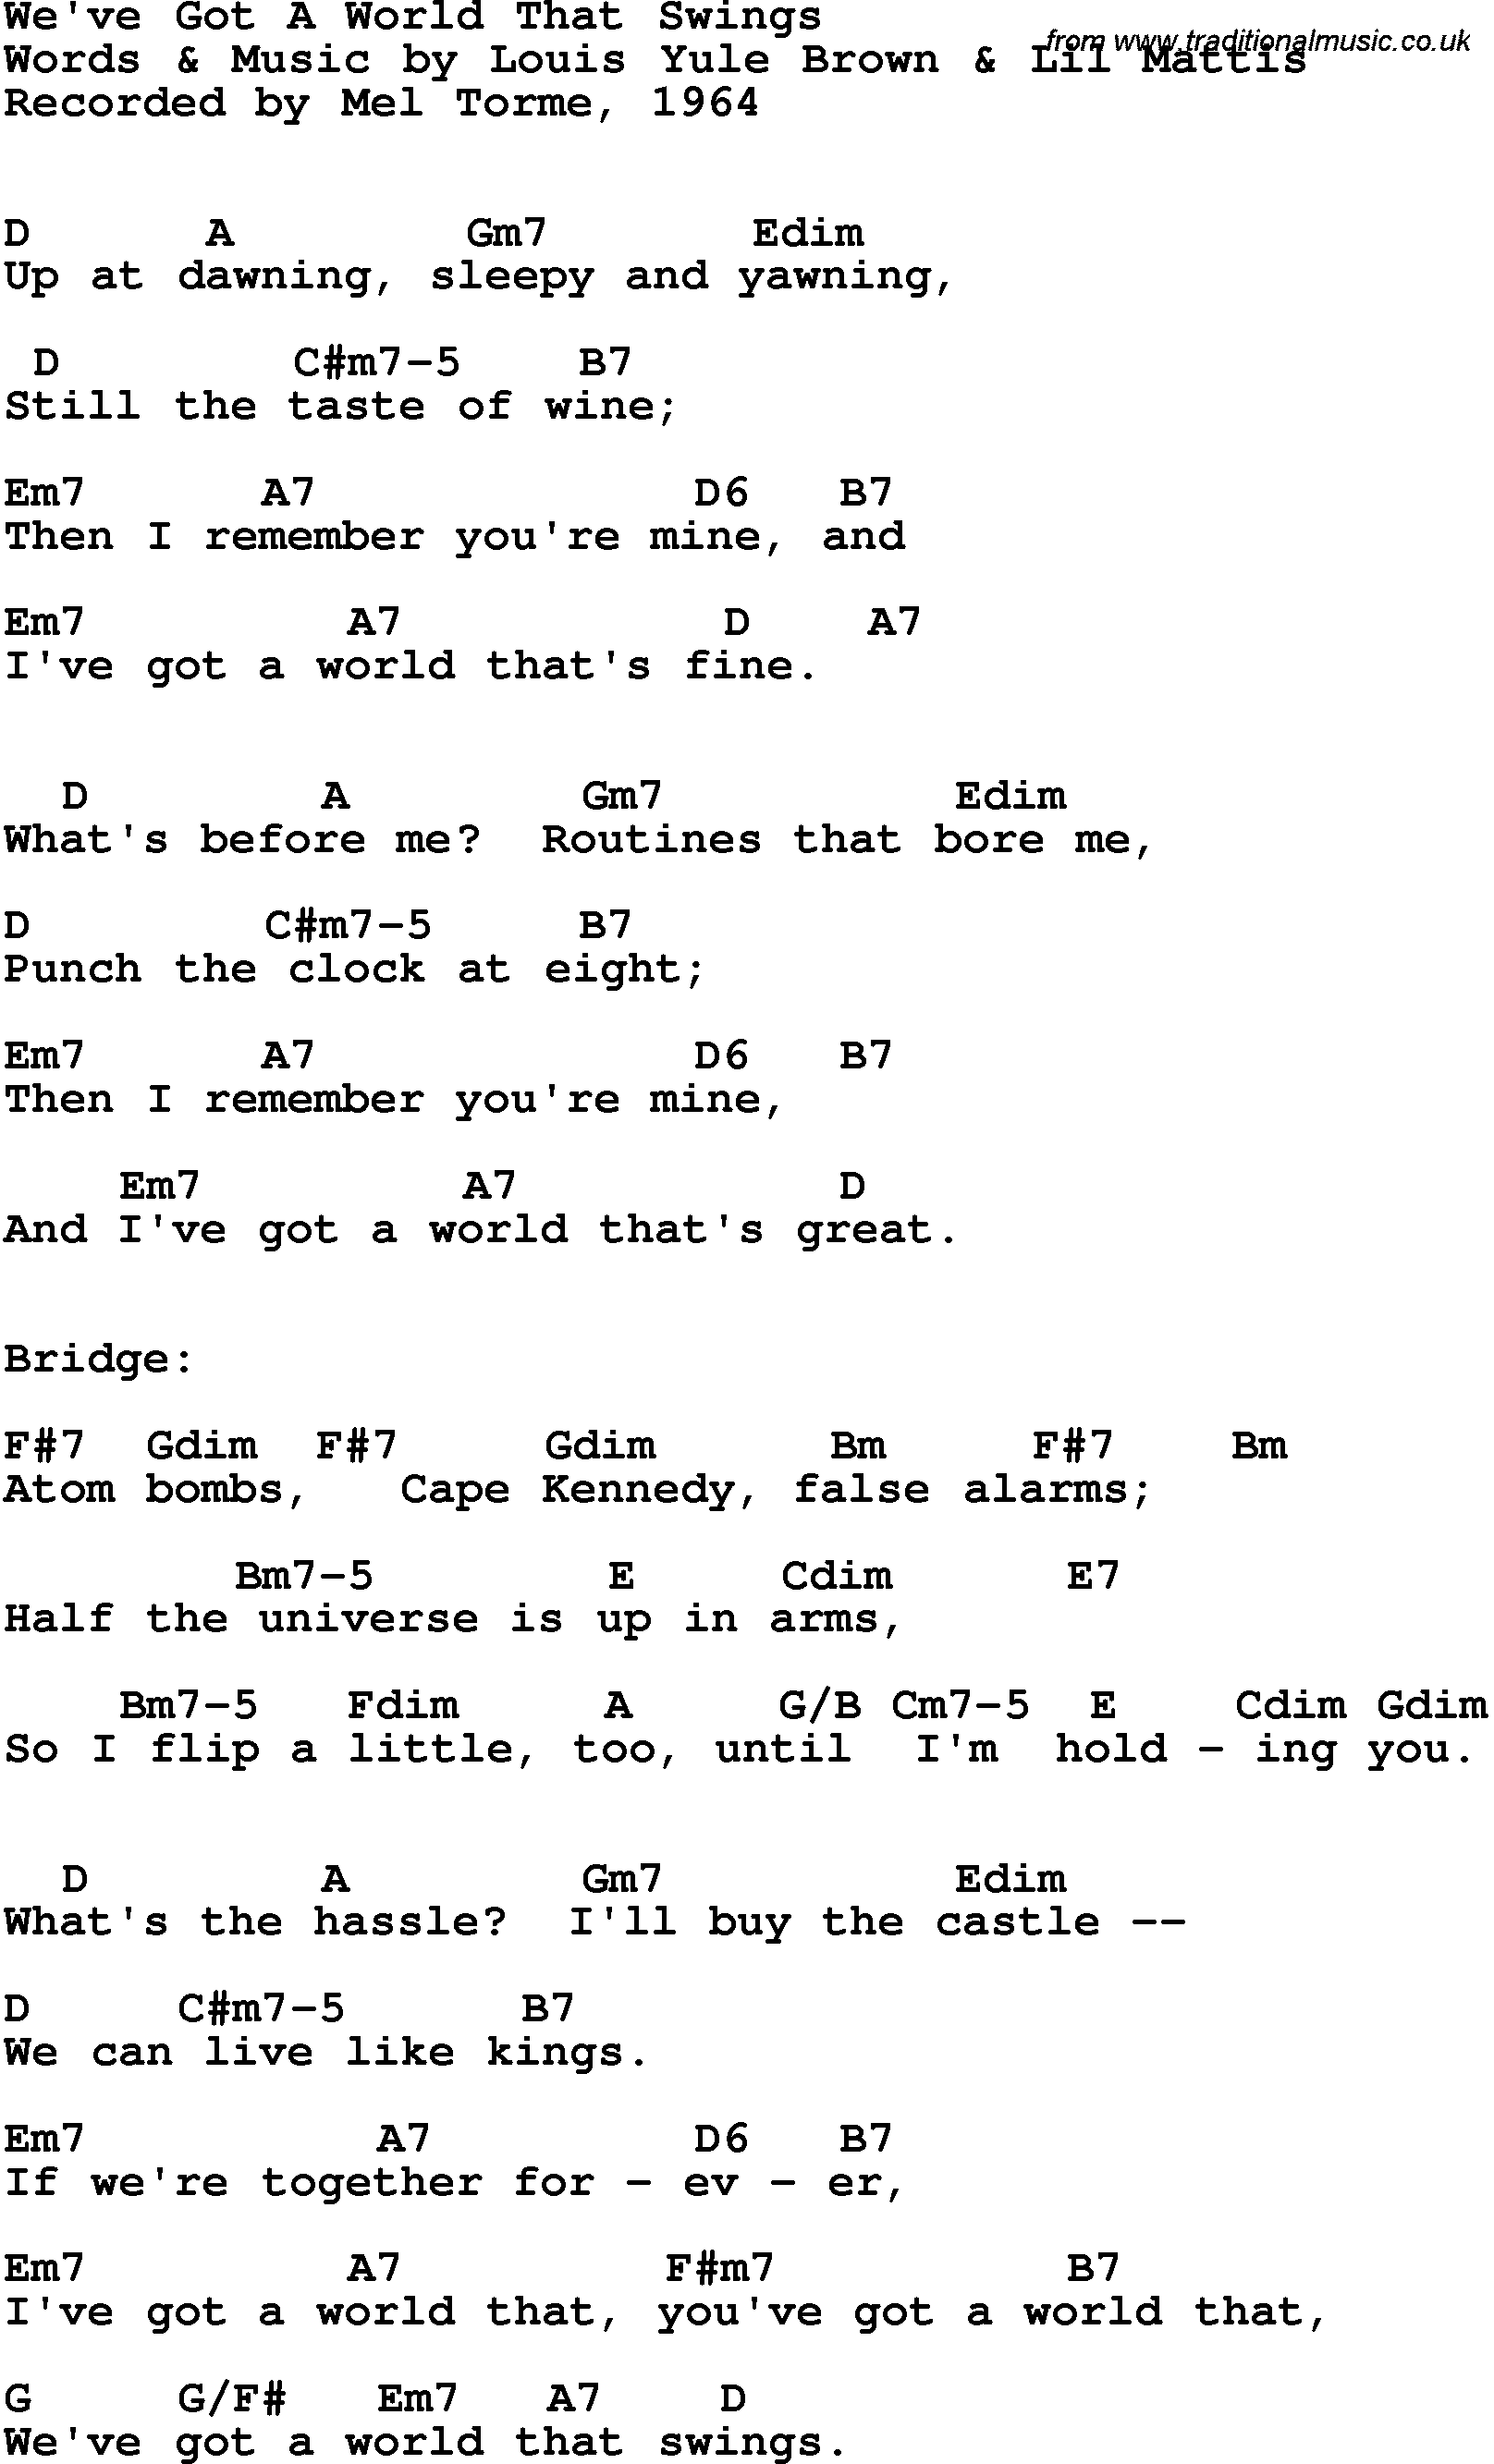 Song Lyrics with guitar chords for We've Got A World That Swings - Mel Torme, 1964